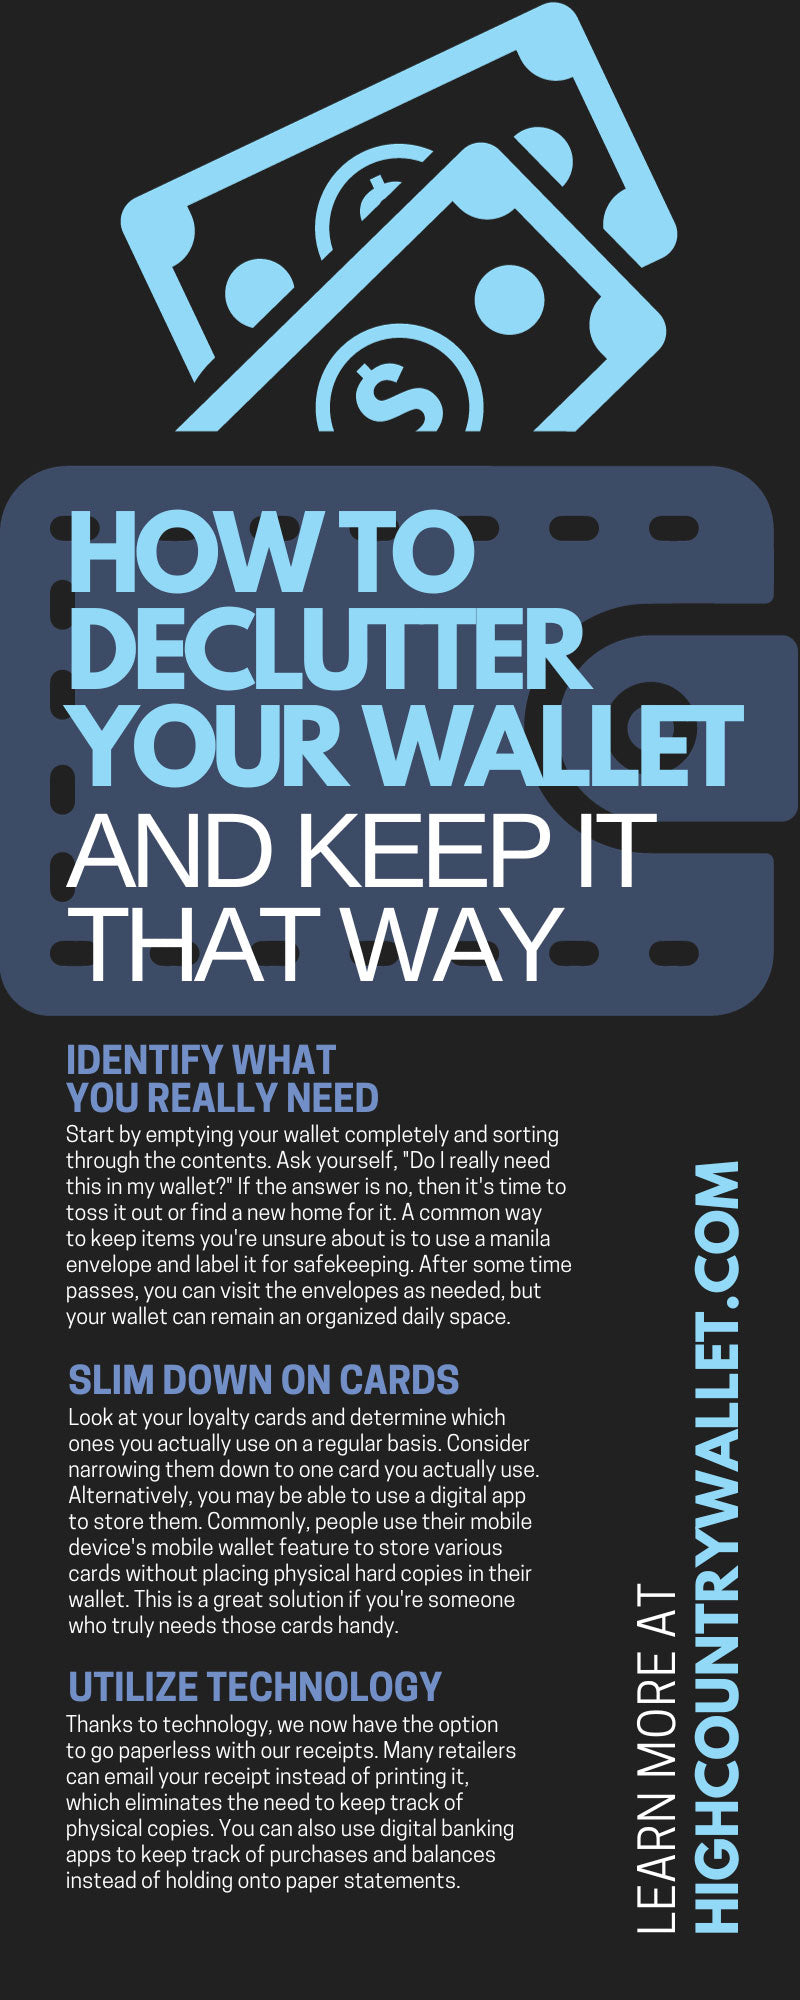 How To Declutter Your Wallet and Keep It That Way